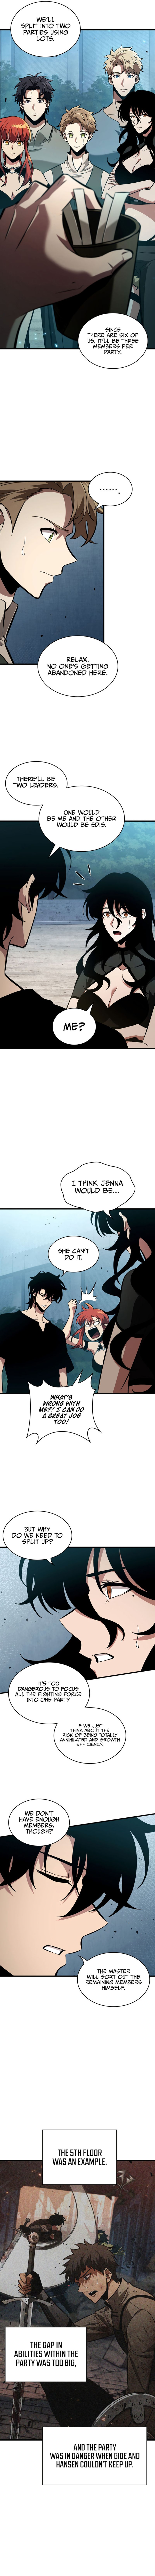 Pick Me Up Chapter 19 page 5